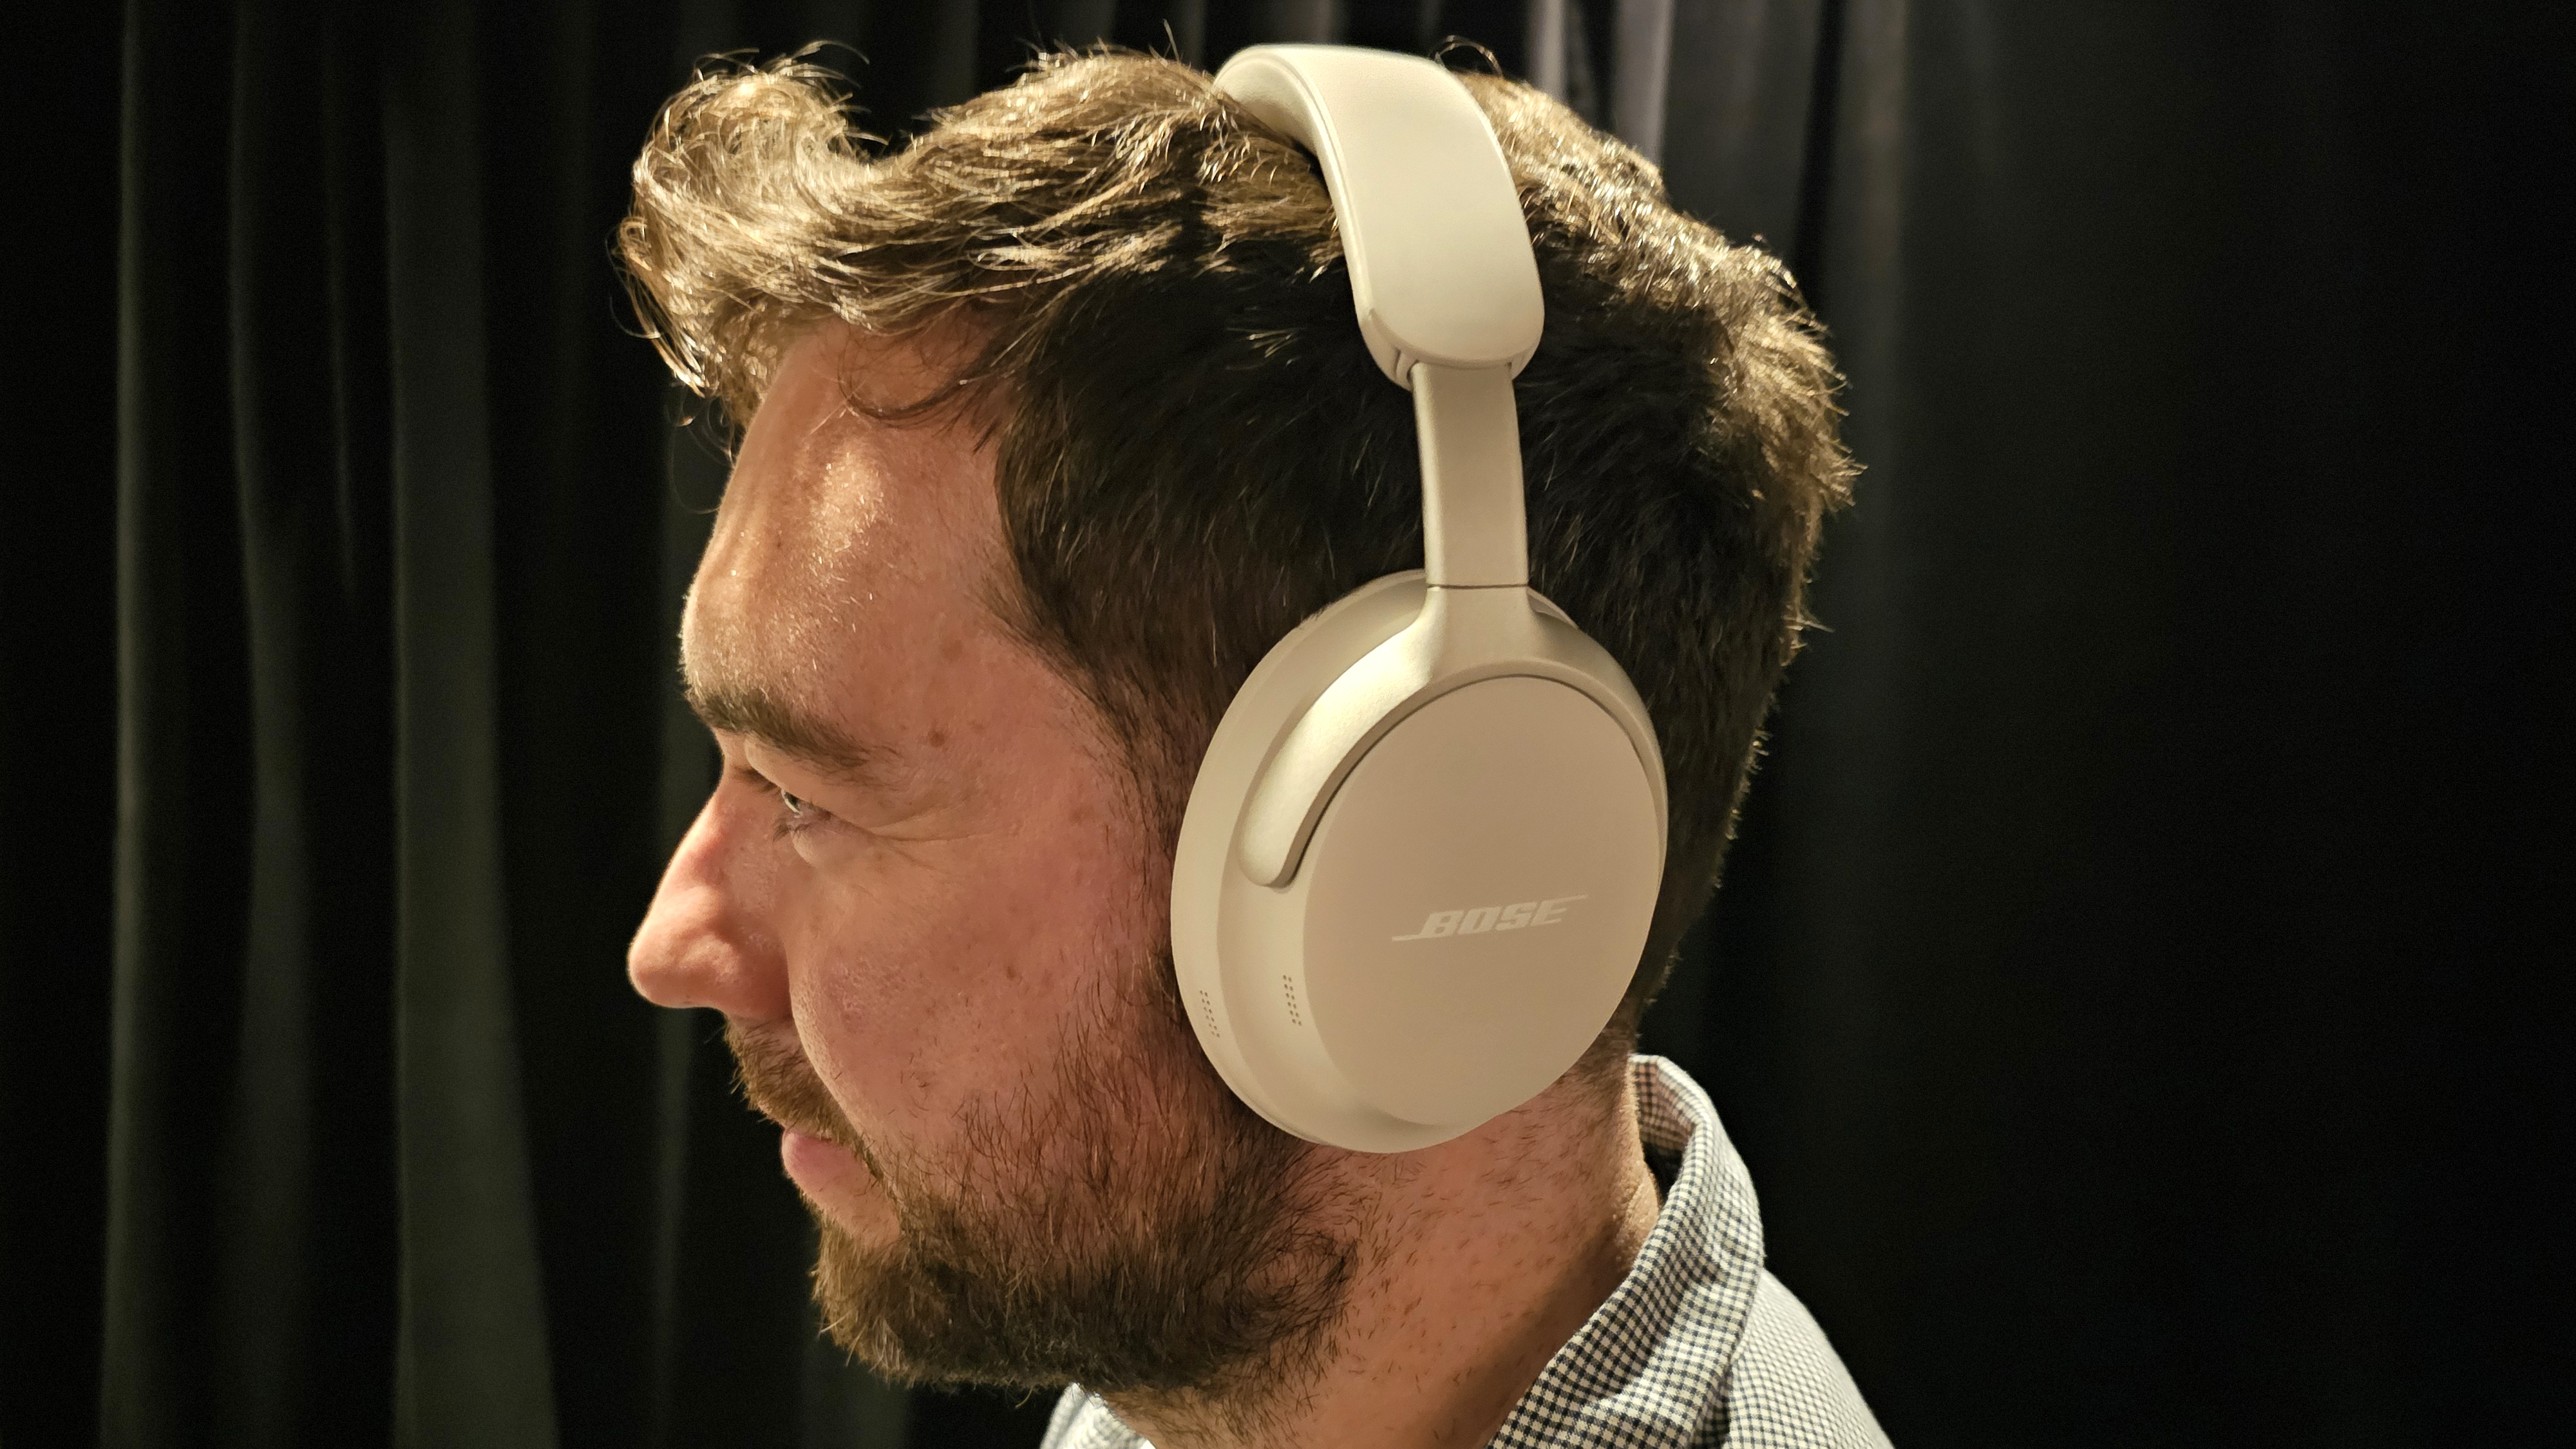 I tested Bose's QuietComfort Ultra Headphones and these are the best  features